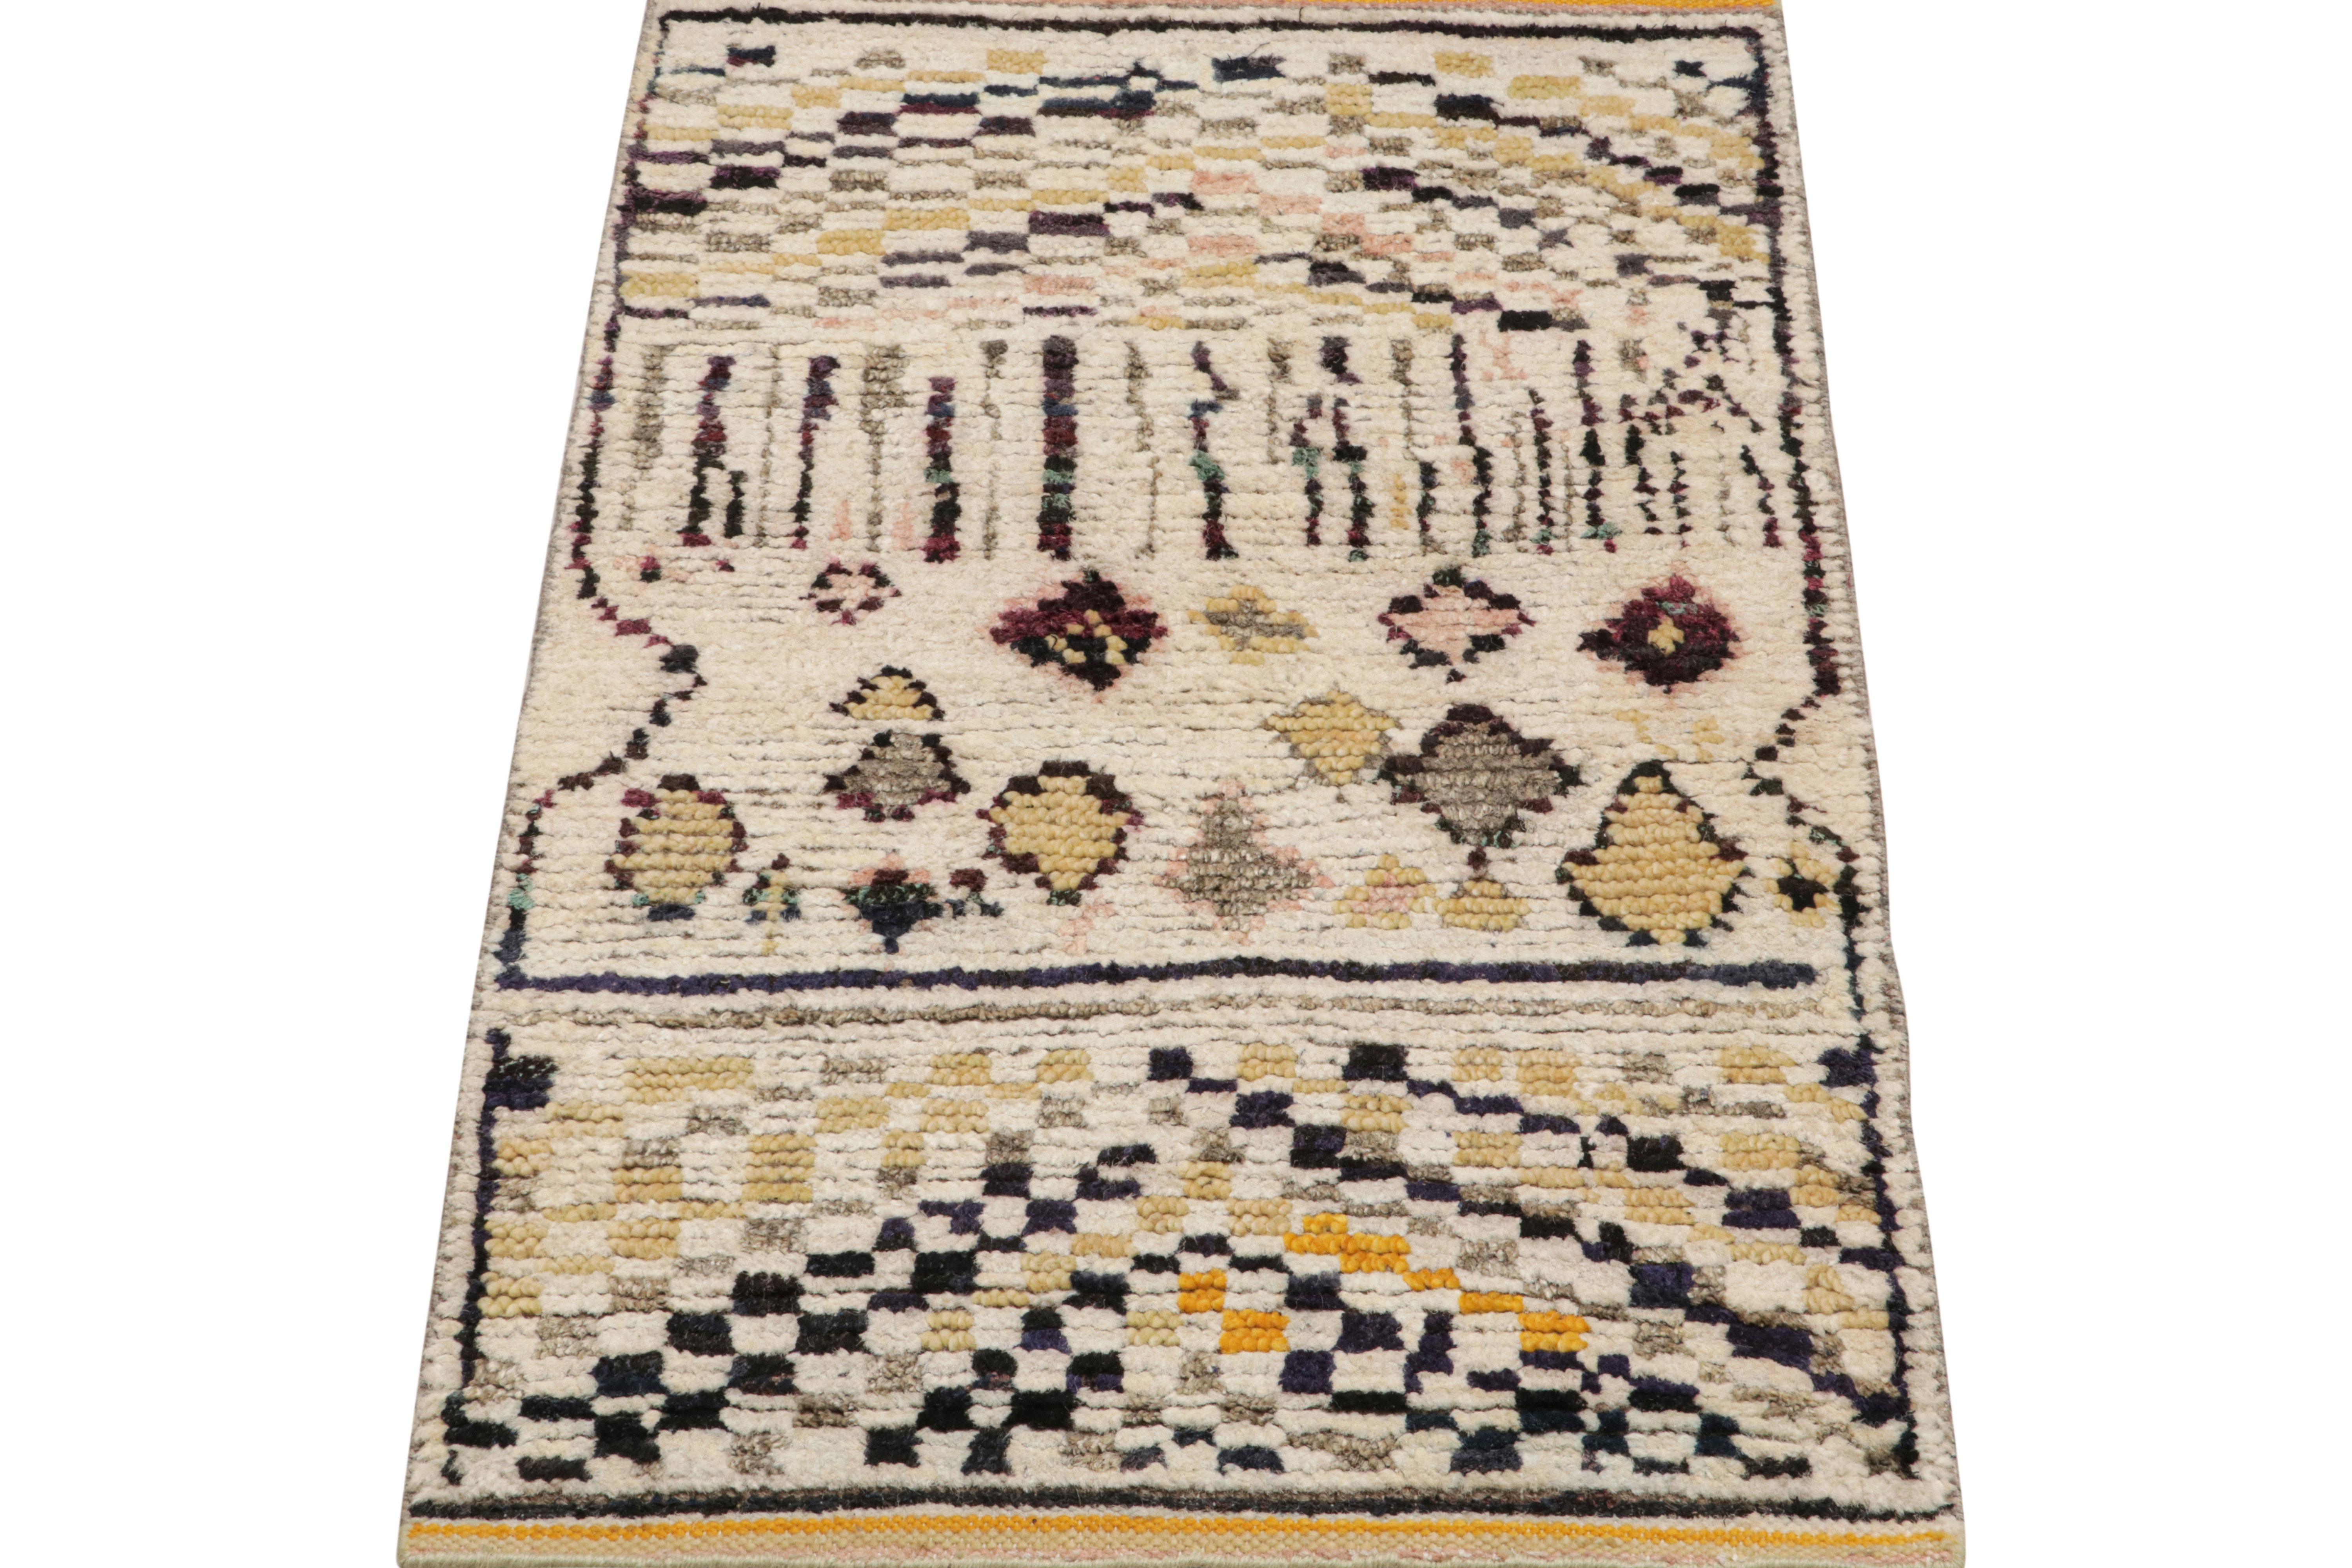 Hand-knotted in wool and silk, this 2x3 Moroccan scatter rug features a ribbed texture inspired from Boucherouite-style pieces and similar textiles in the primitivist Berber tribal style 

On the Design: 

Connoisseurs may admire the subtle appeal